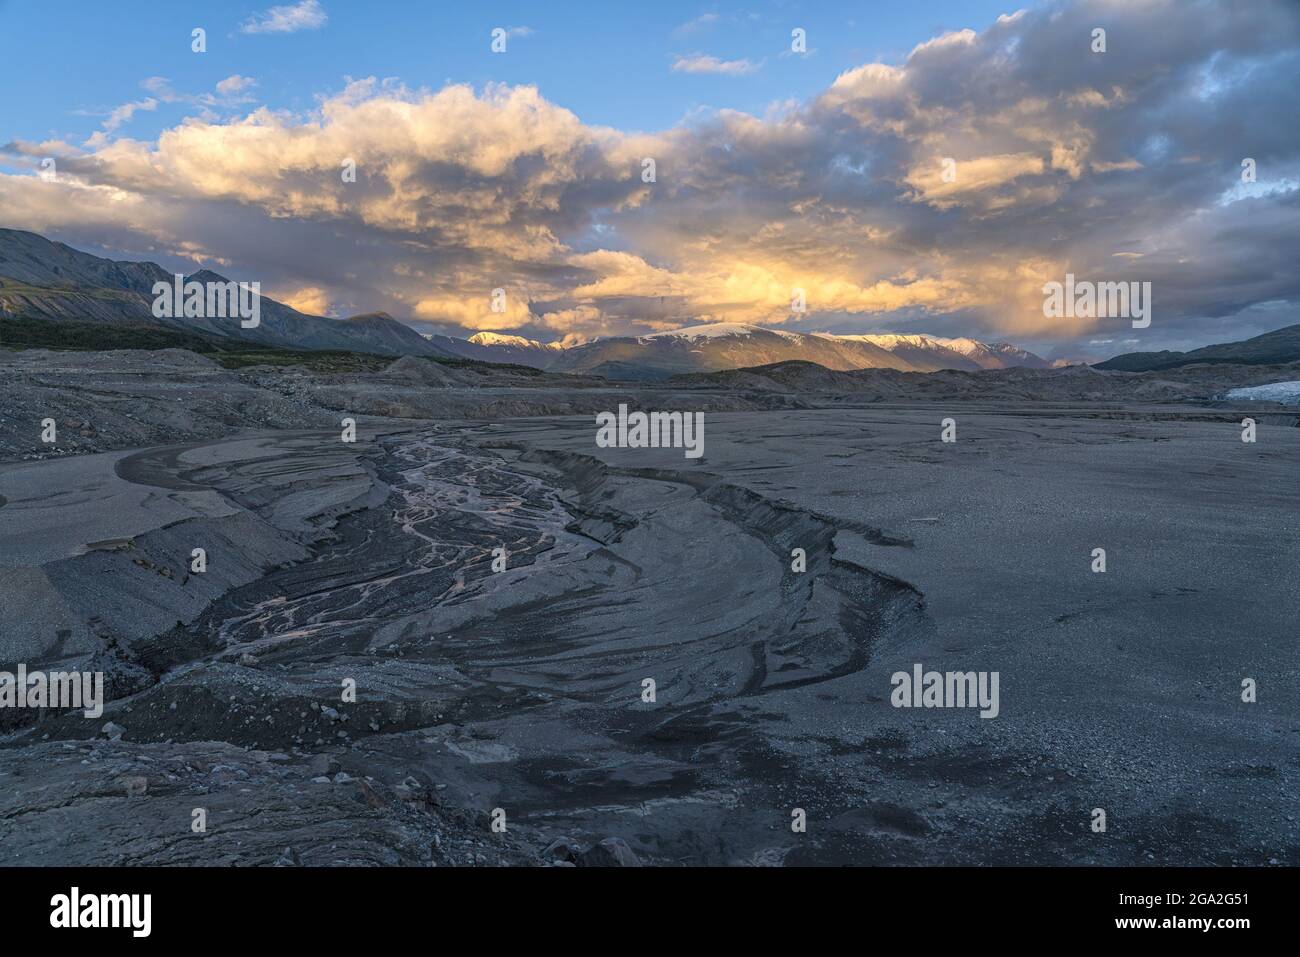 The setting sun lights up the clouds over the distant peaks of Kluane National Park, Yukon. A small stream flows in the foreground. Situated in the... Stock Photo